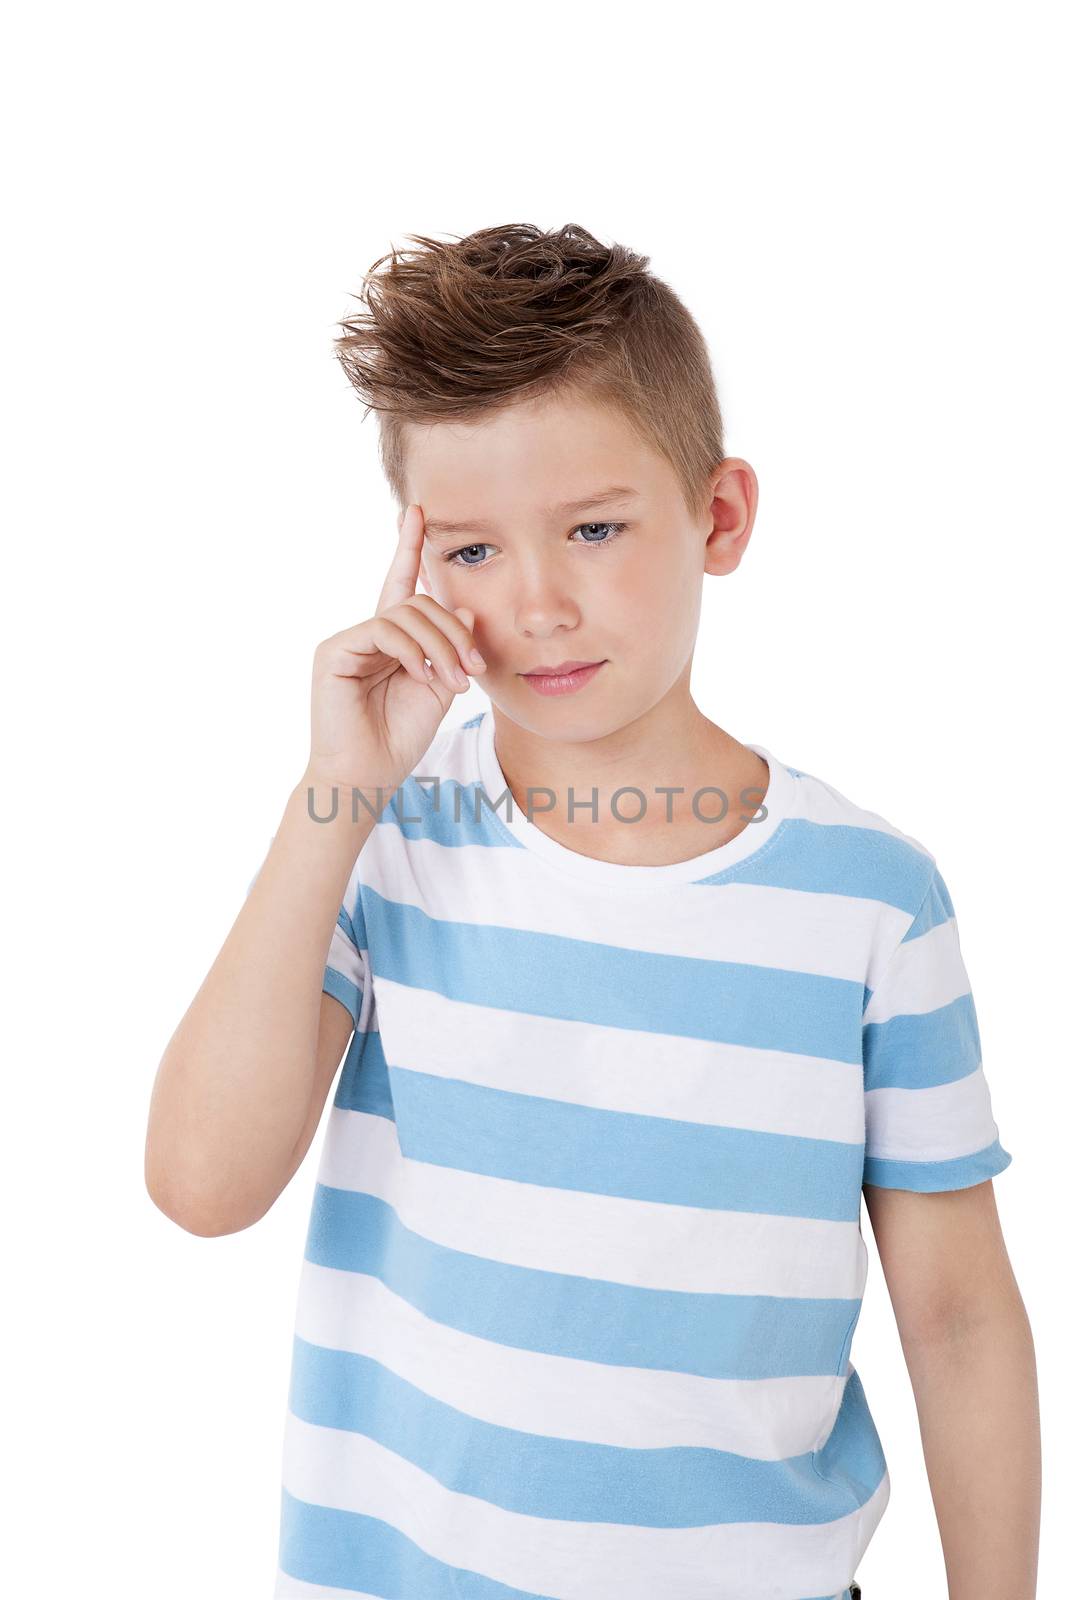 Charming young boy with cool haircut touching eyebrows and thinking isolated on white background.